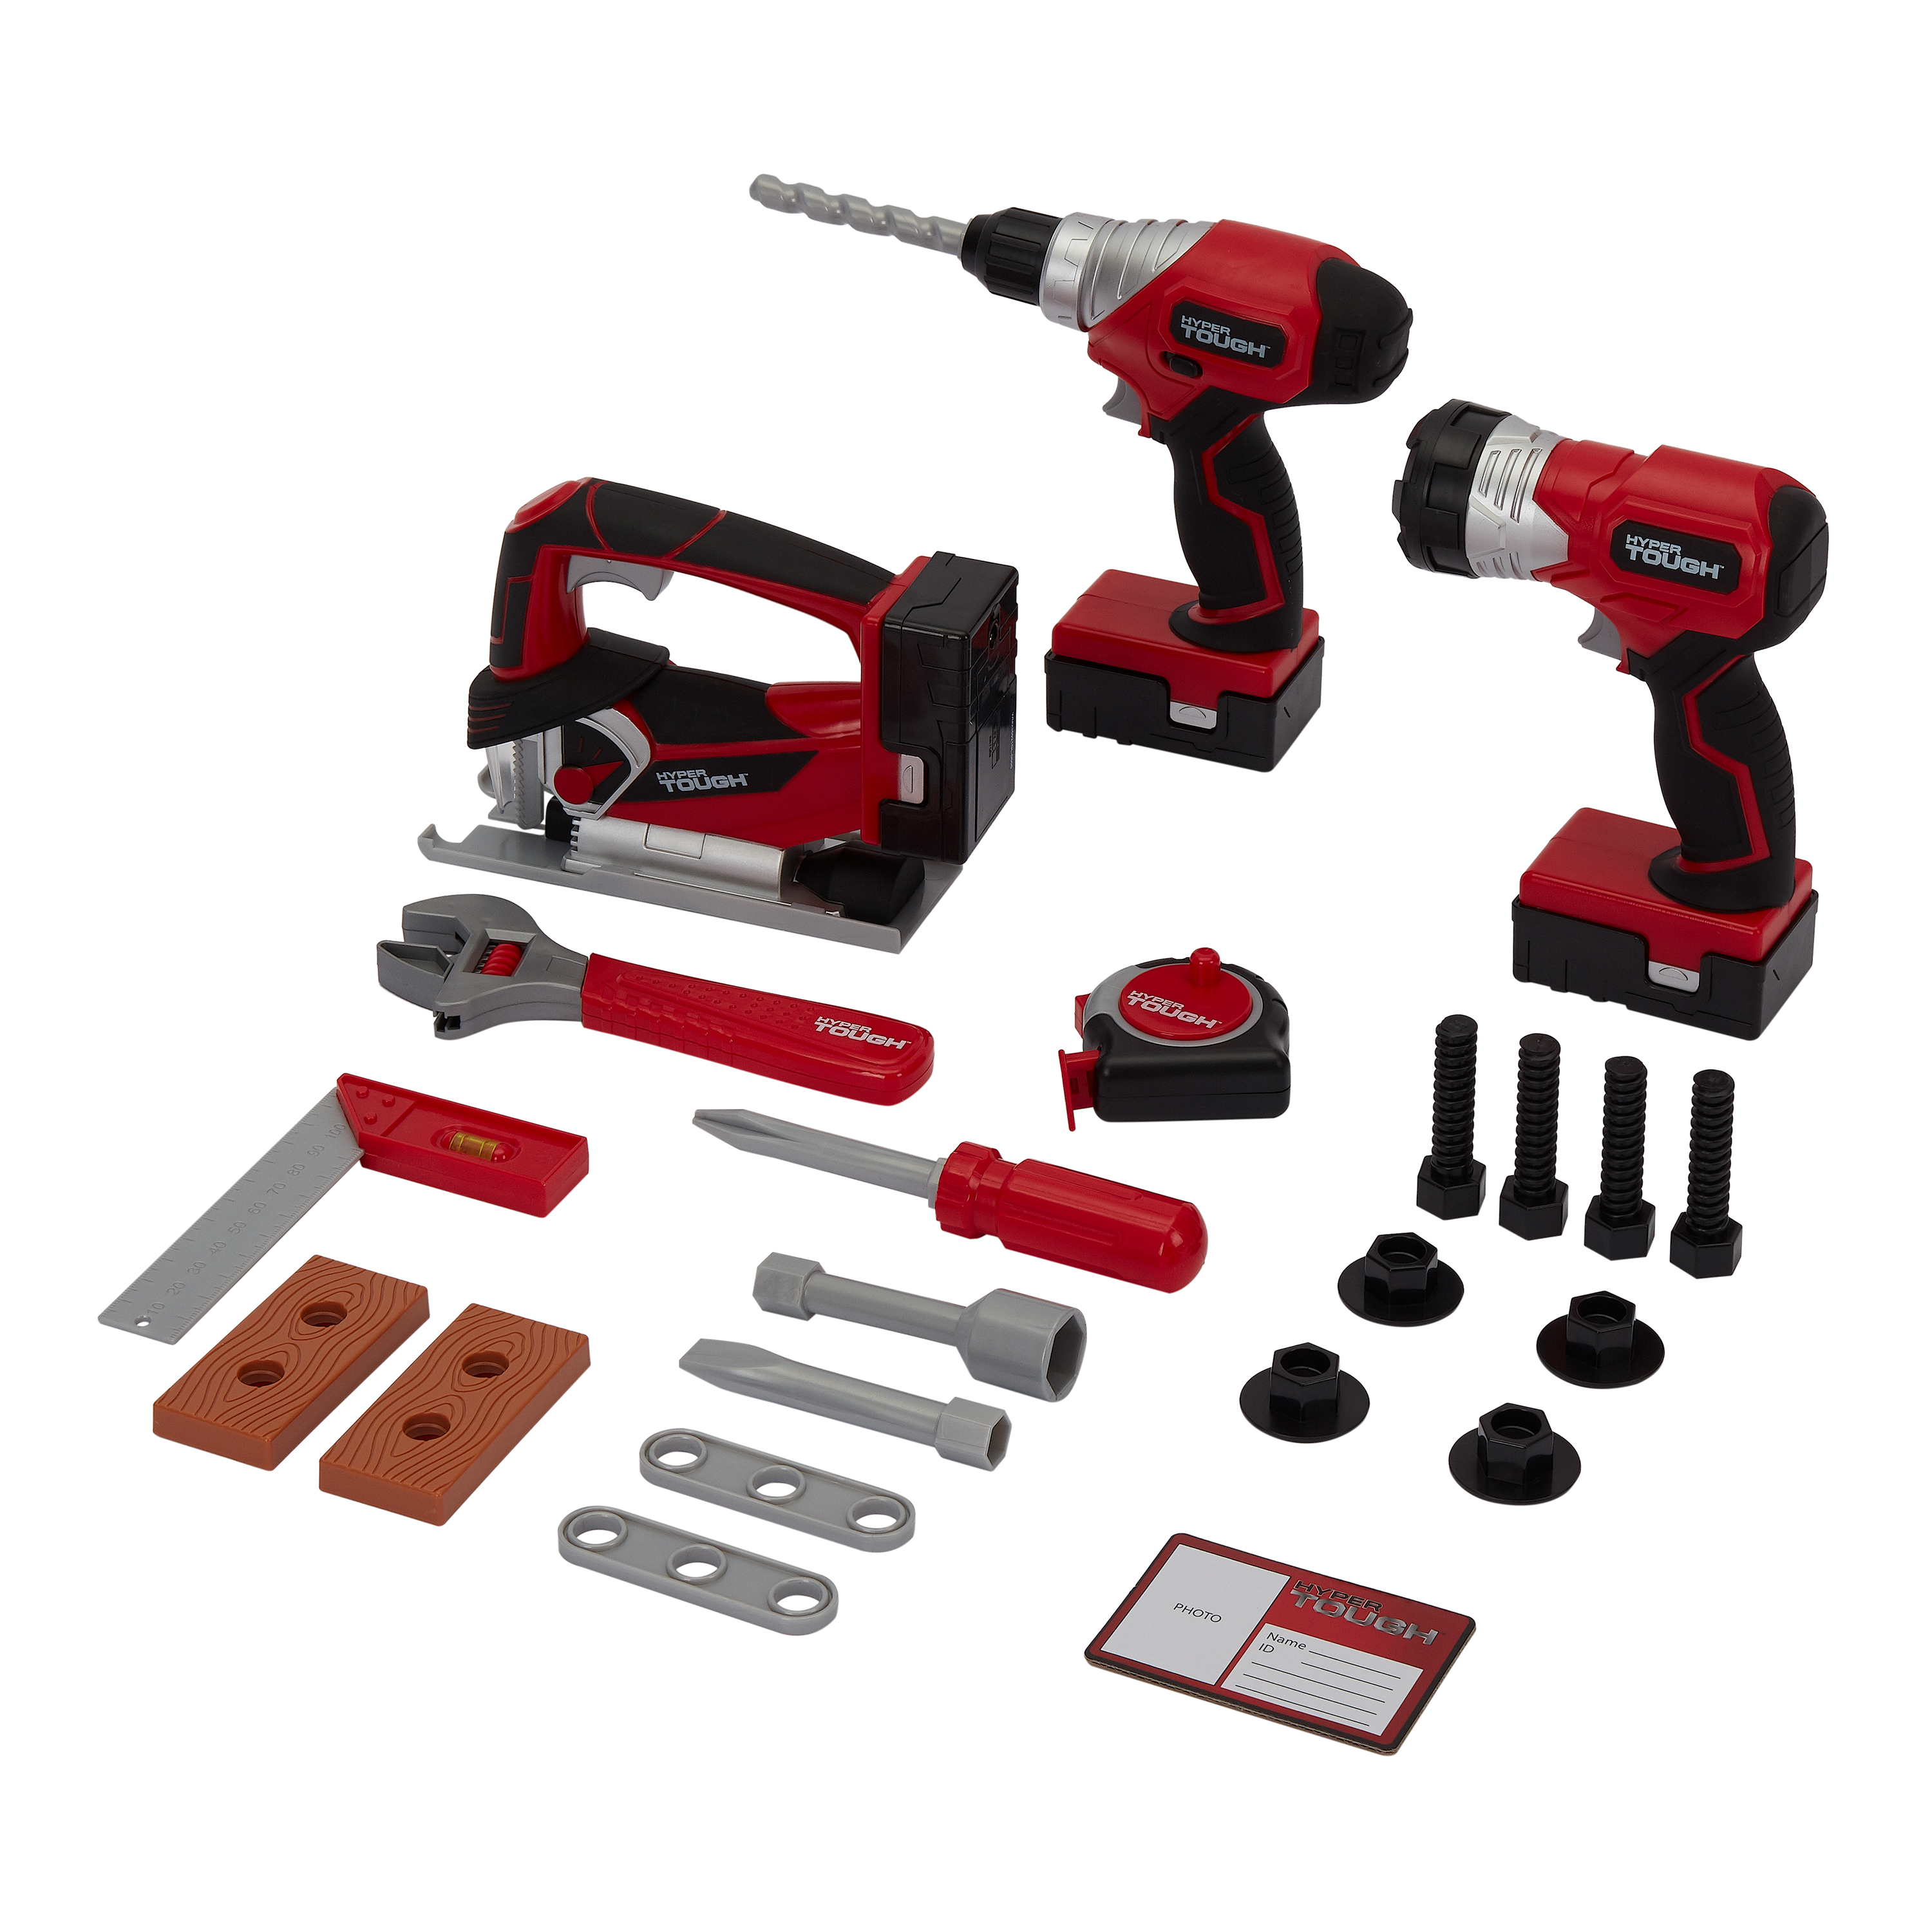 Kid Connection Power Tool Play Set, 24 Pieces - image 1 of 10